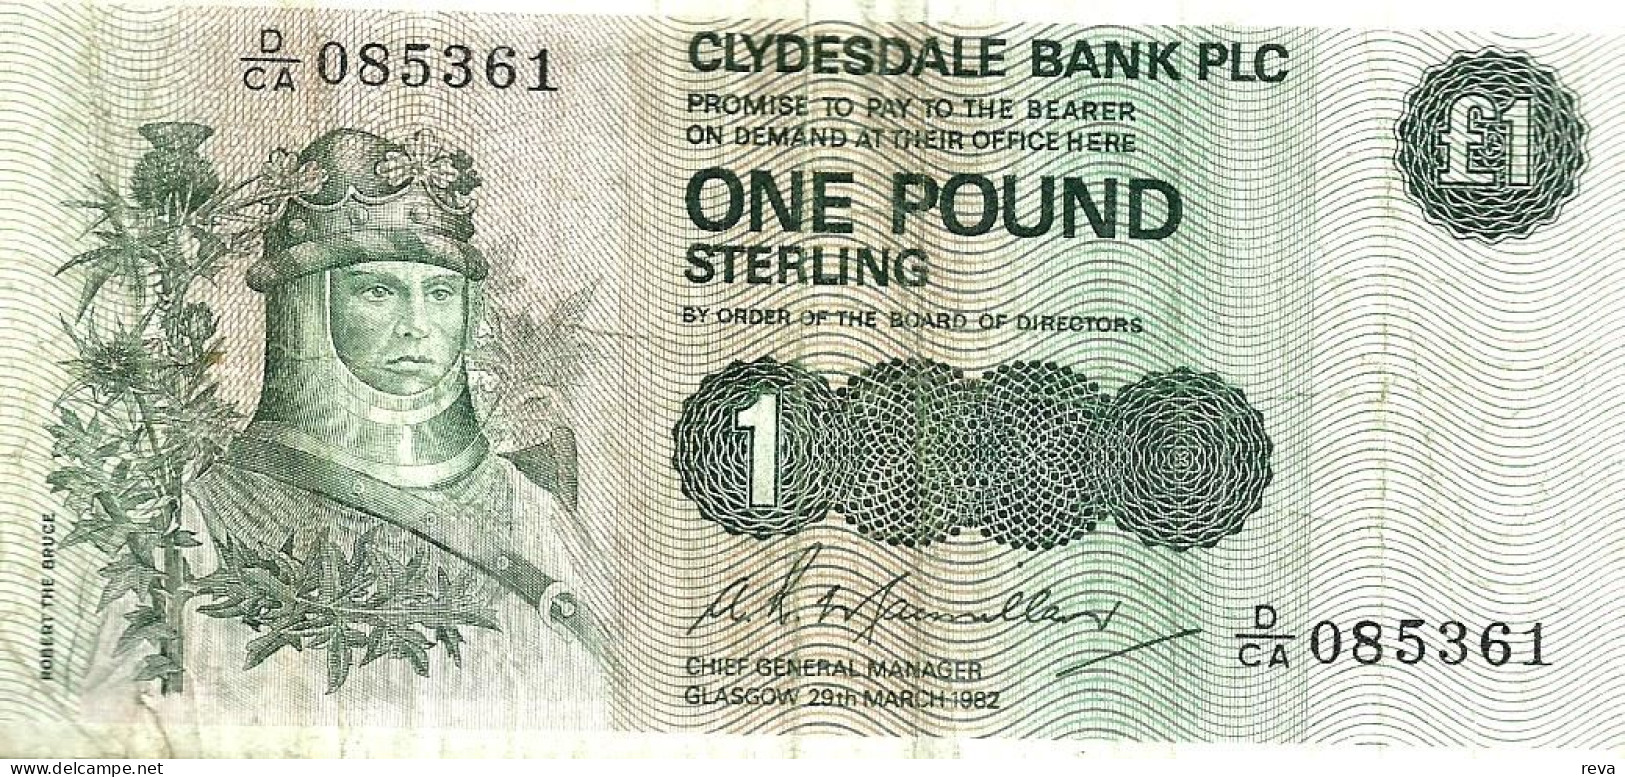 UNITED KINGDOM SCOTLAND 1 POUND GREEN CLYDESDALE BANK MAN FRONT KNIGHT BACK DATED 29-03-1982 P221a READ DESCRIPTION !! - 1 Pound